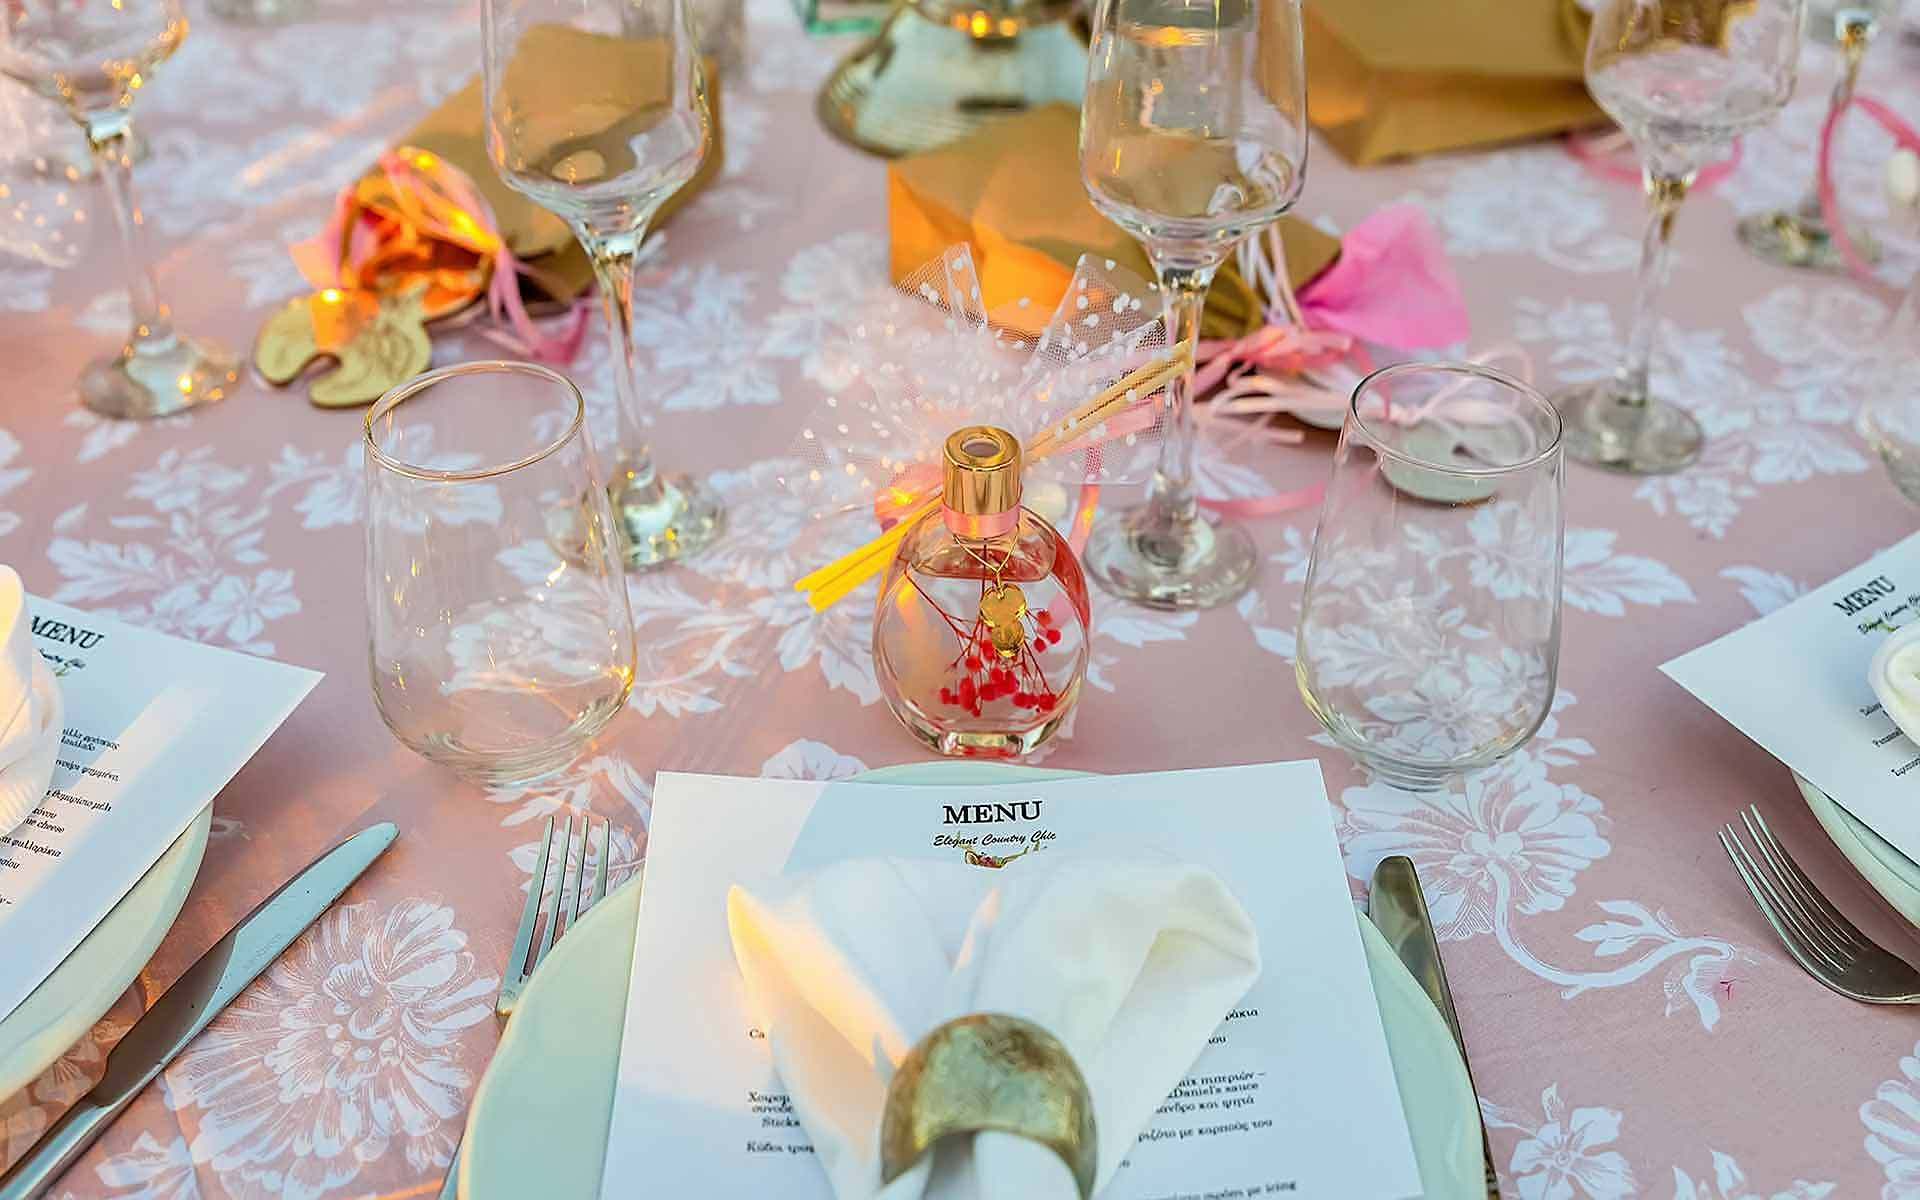 Wedding Menu Ideas for a Summer decoration with bottle flavor as a gift for the guests